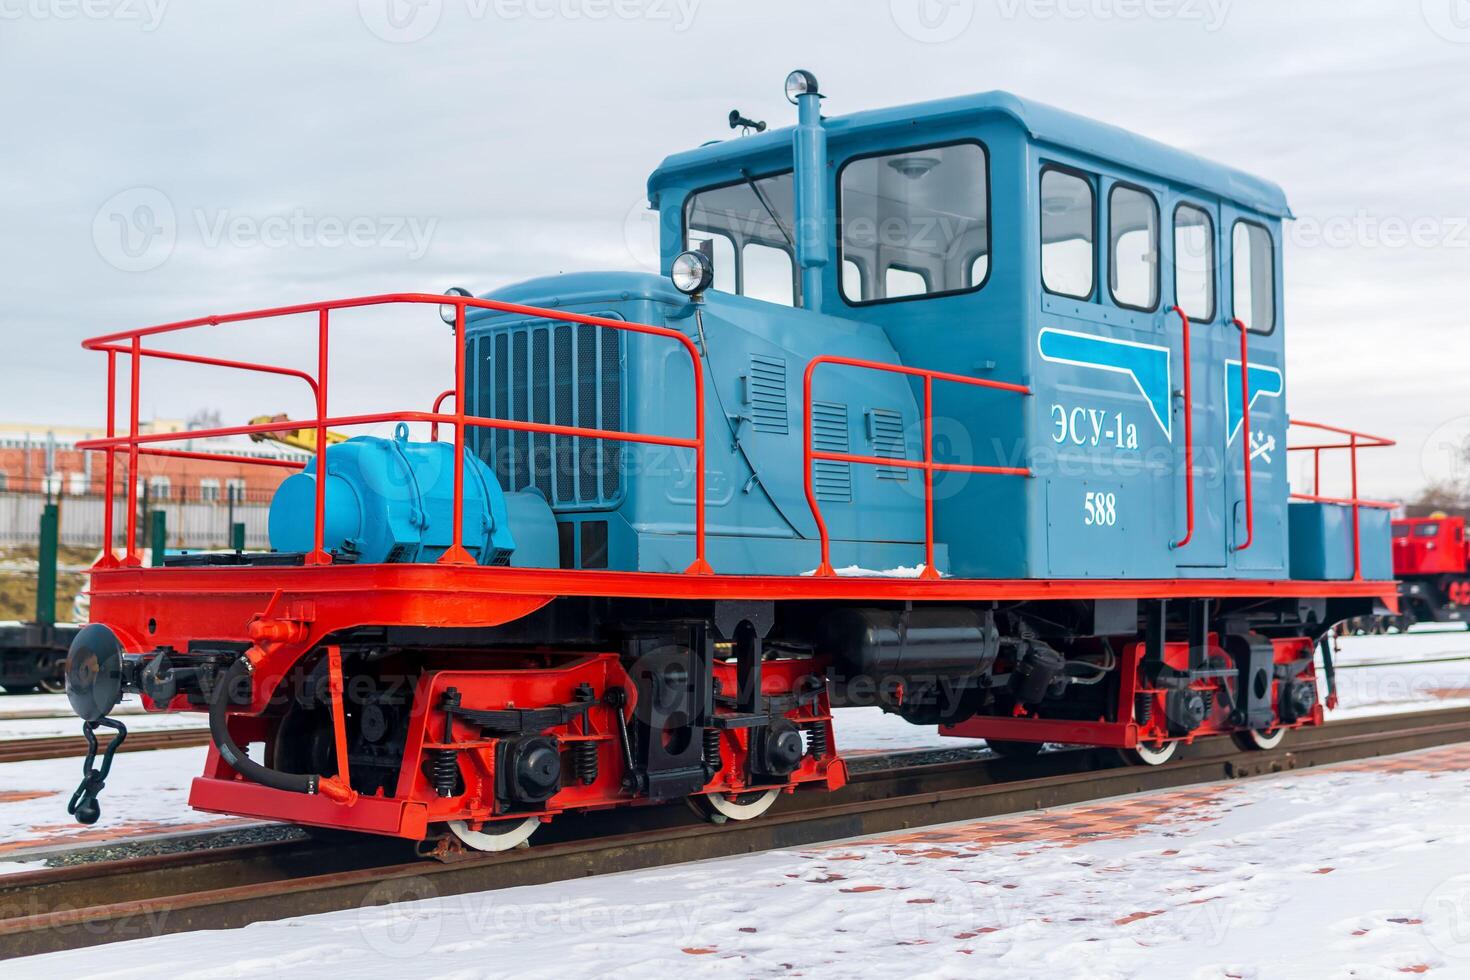 Self-propelled power plant ESU1a at the Museum of Narrow Gauge Railways in Yekaterinburg, Russia photo